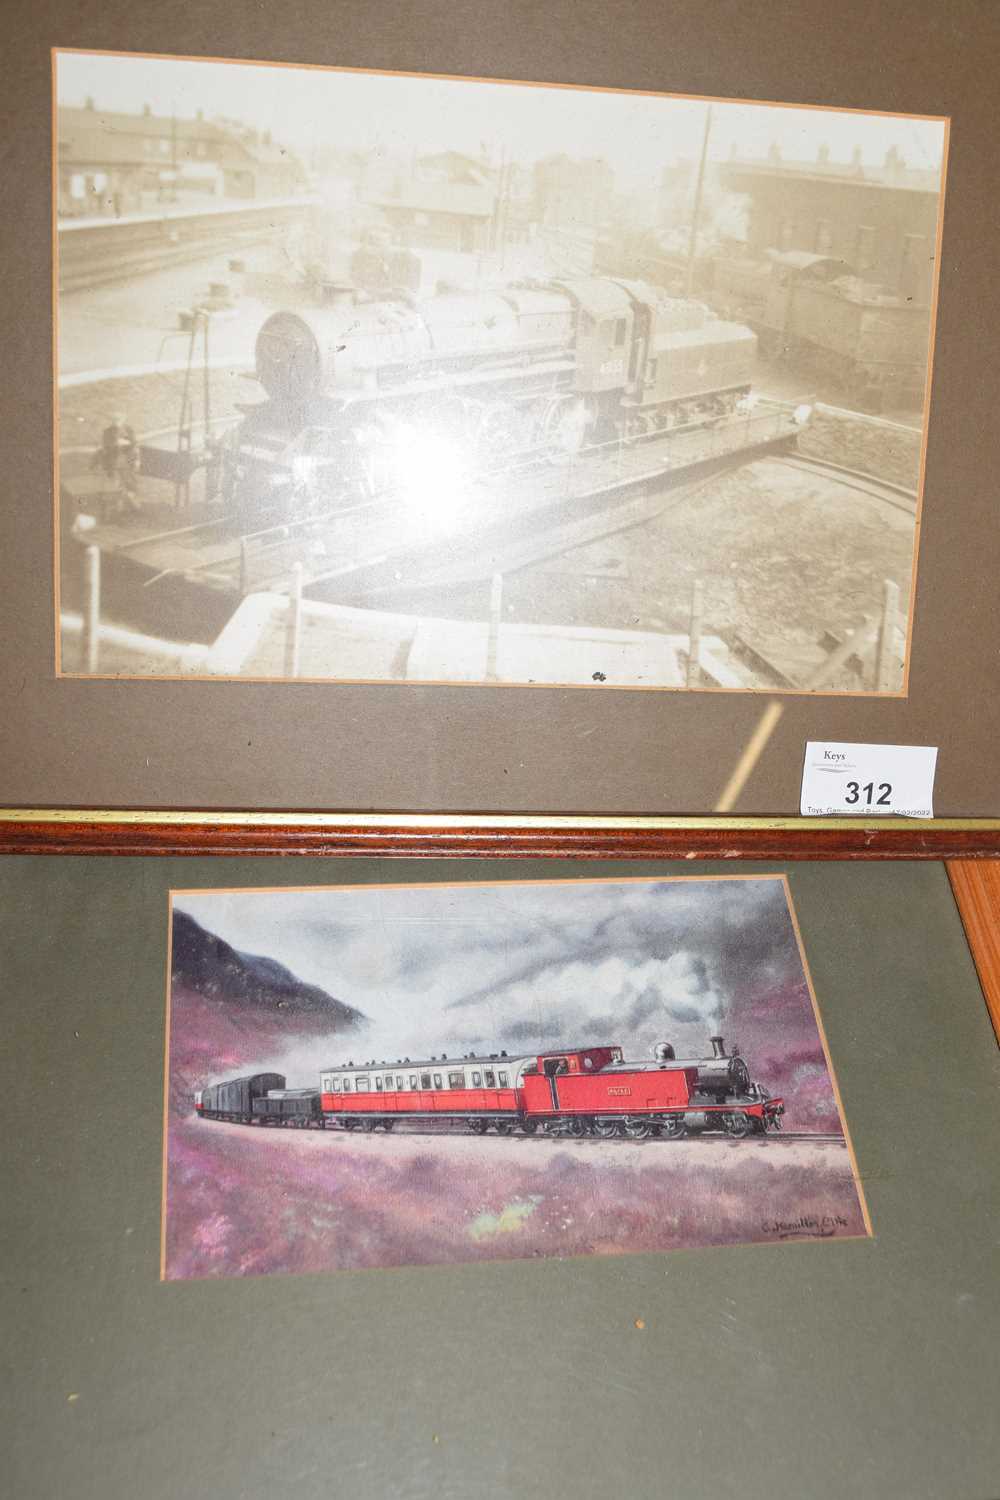 Framed black and white photograph of a locomotive together with a framed coloured print of a